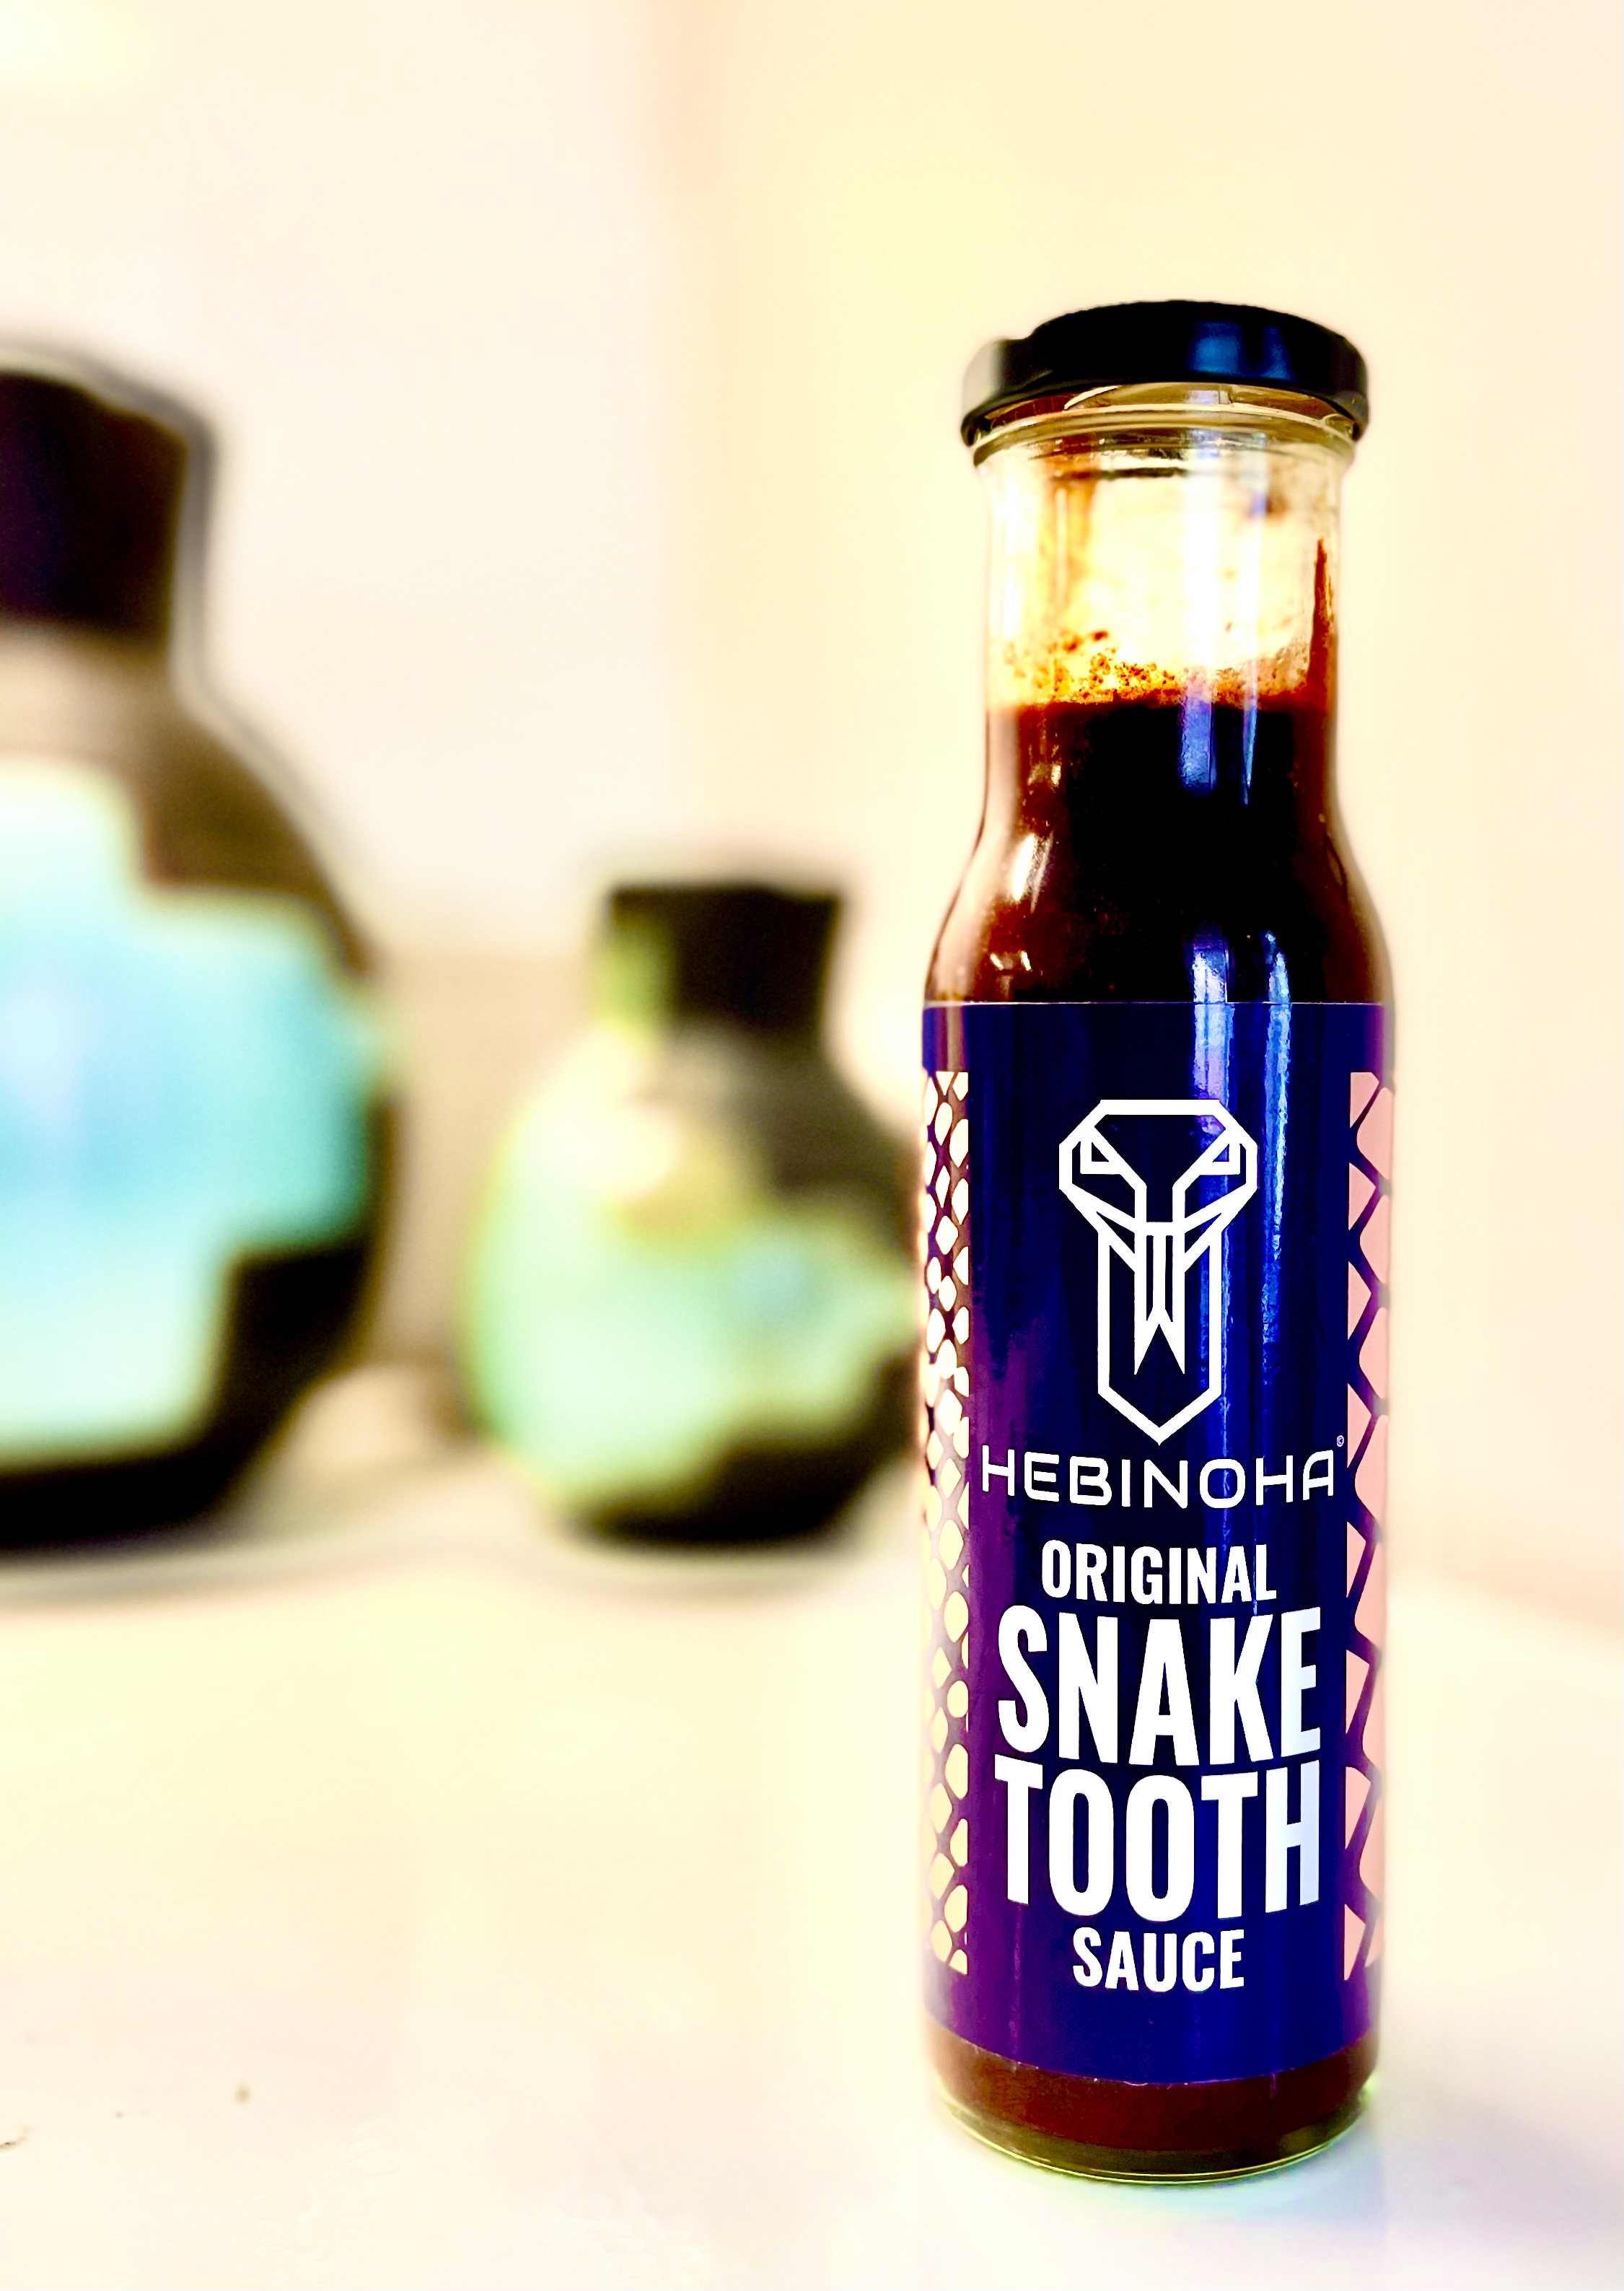 Hebinohà Snaketooth Sauce Is First-Ever Food Product To Introduce Dynamic Pricing